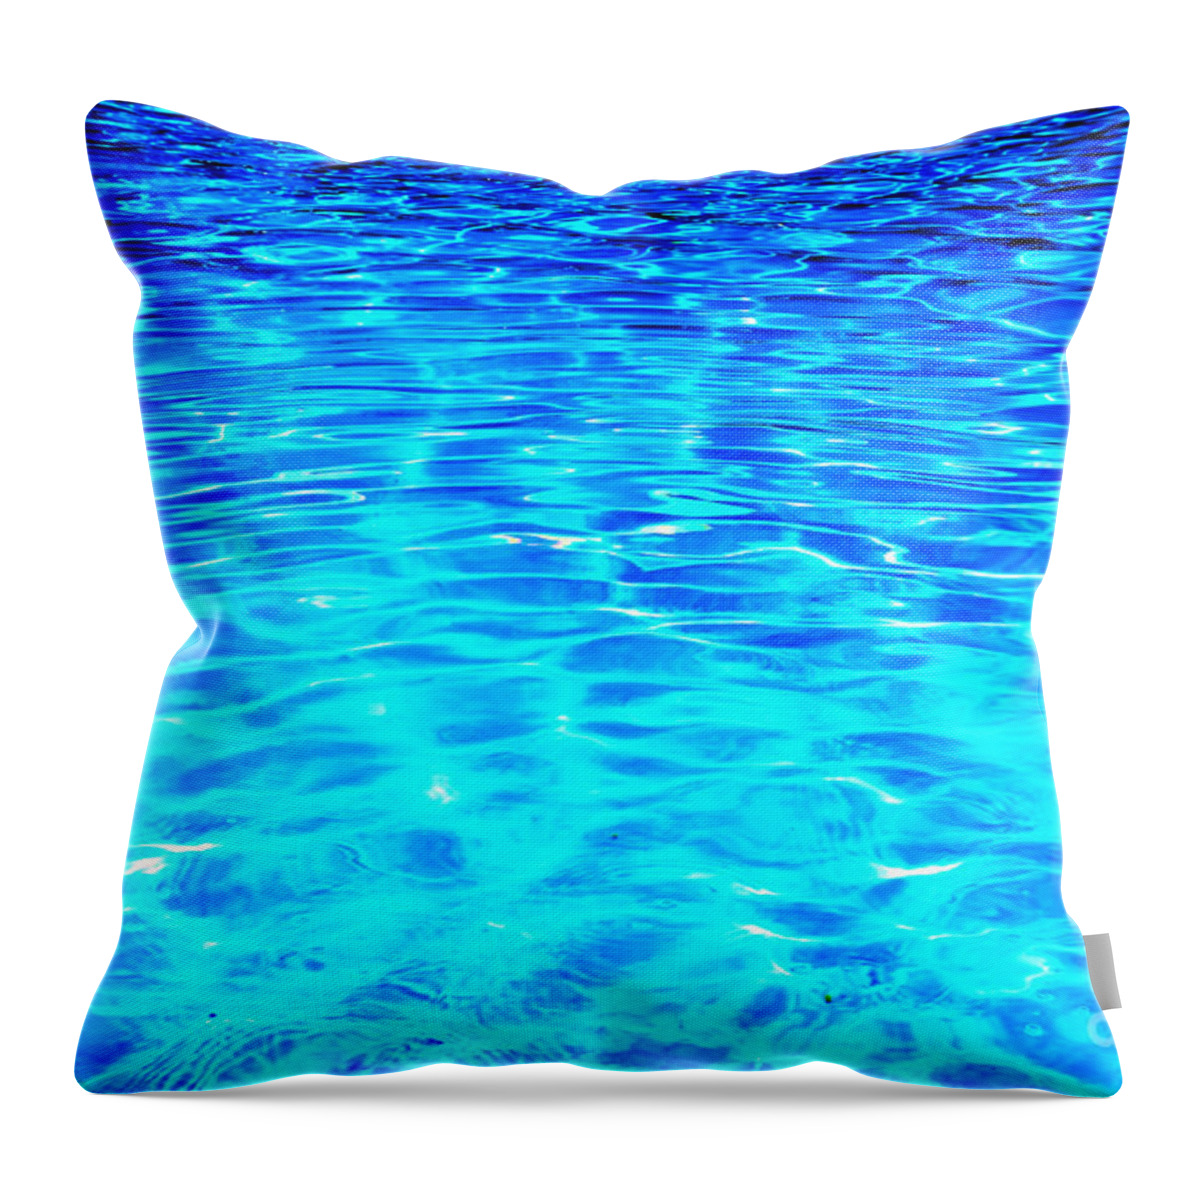 Blue Throw Pillow featuring the photograph Blue or Green by Ramona Matei